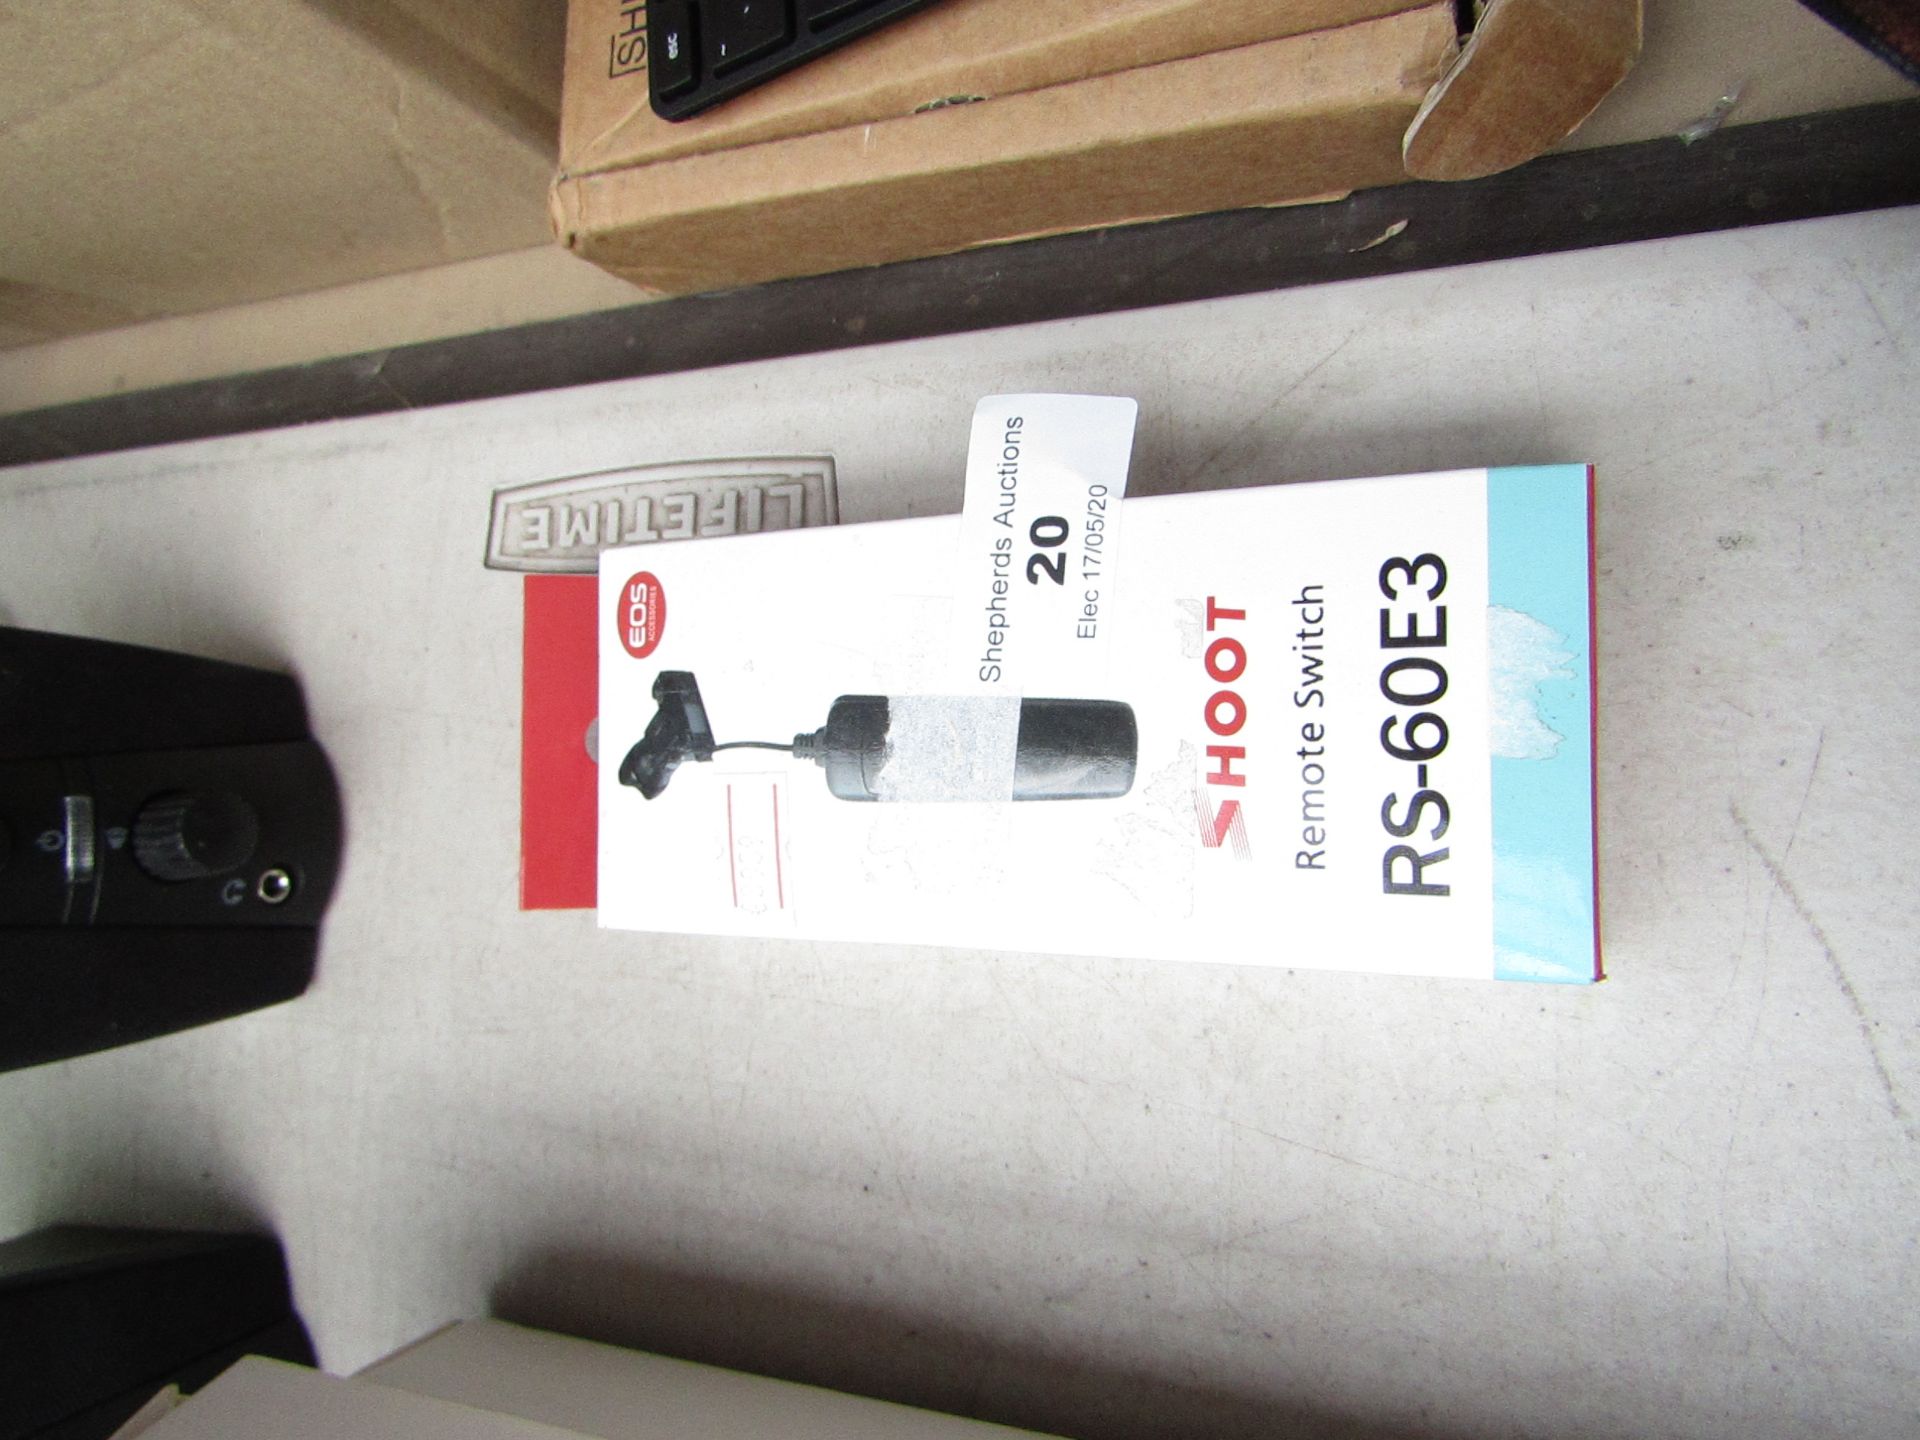 Shoot remote switch RS-60E3, untested and boxed.